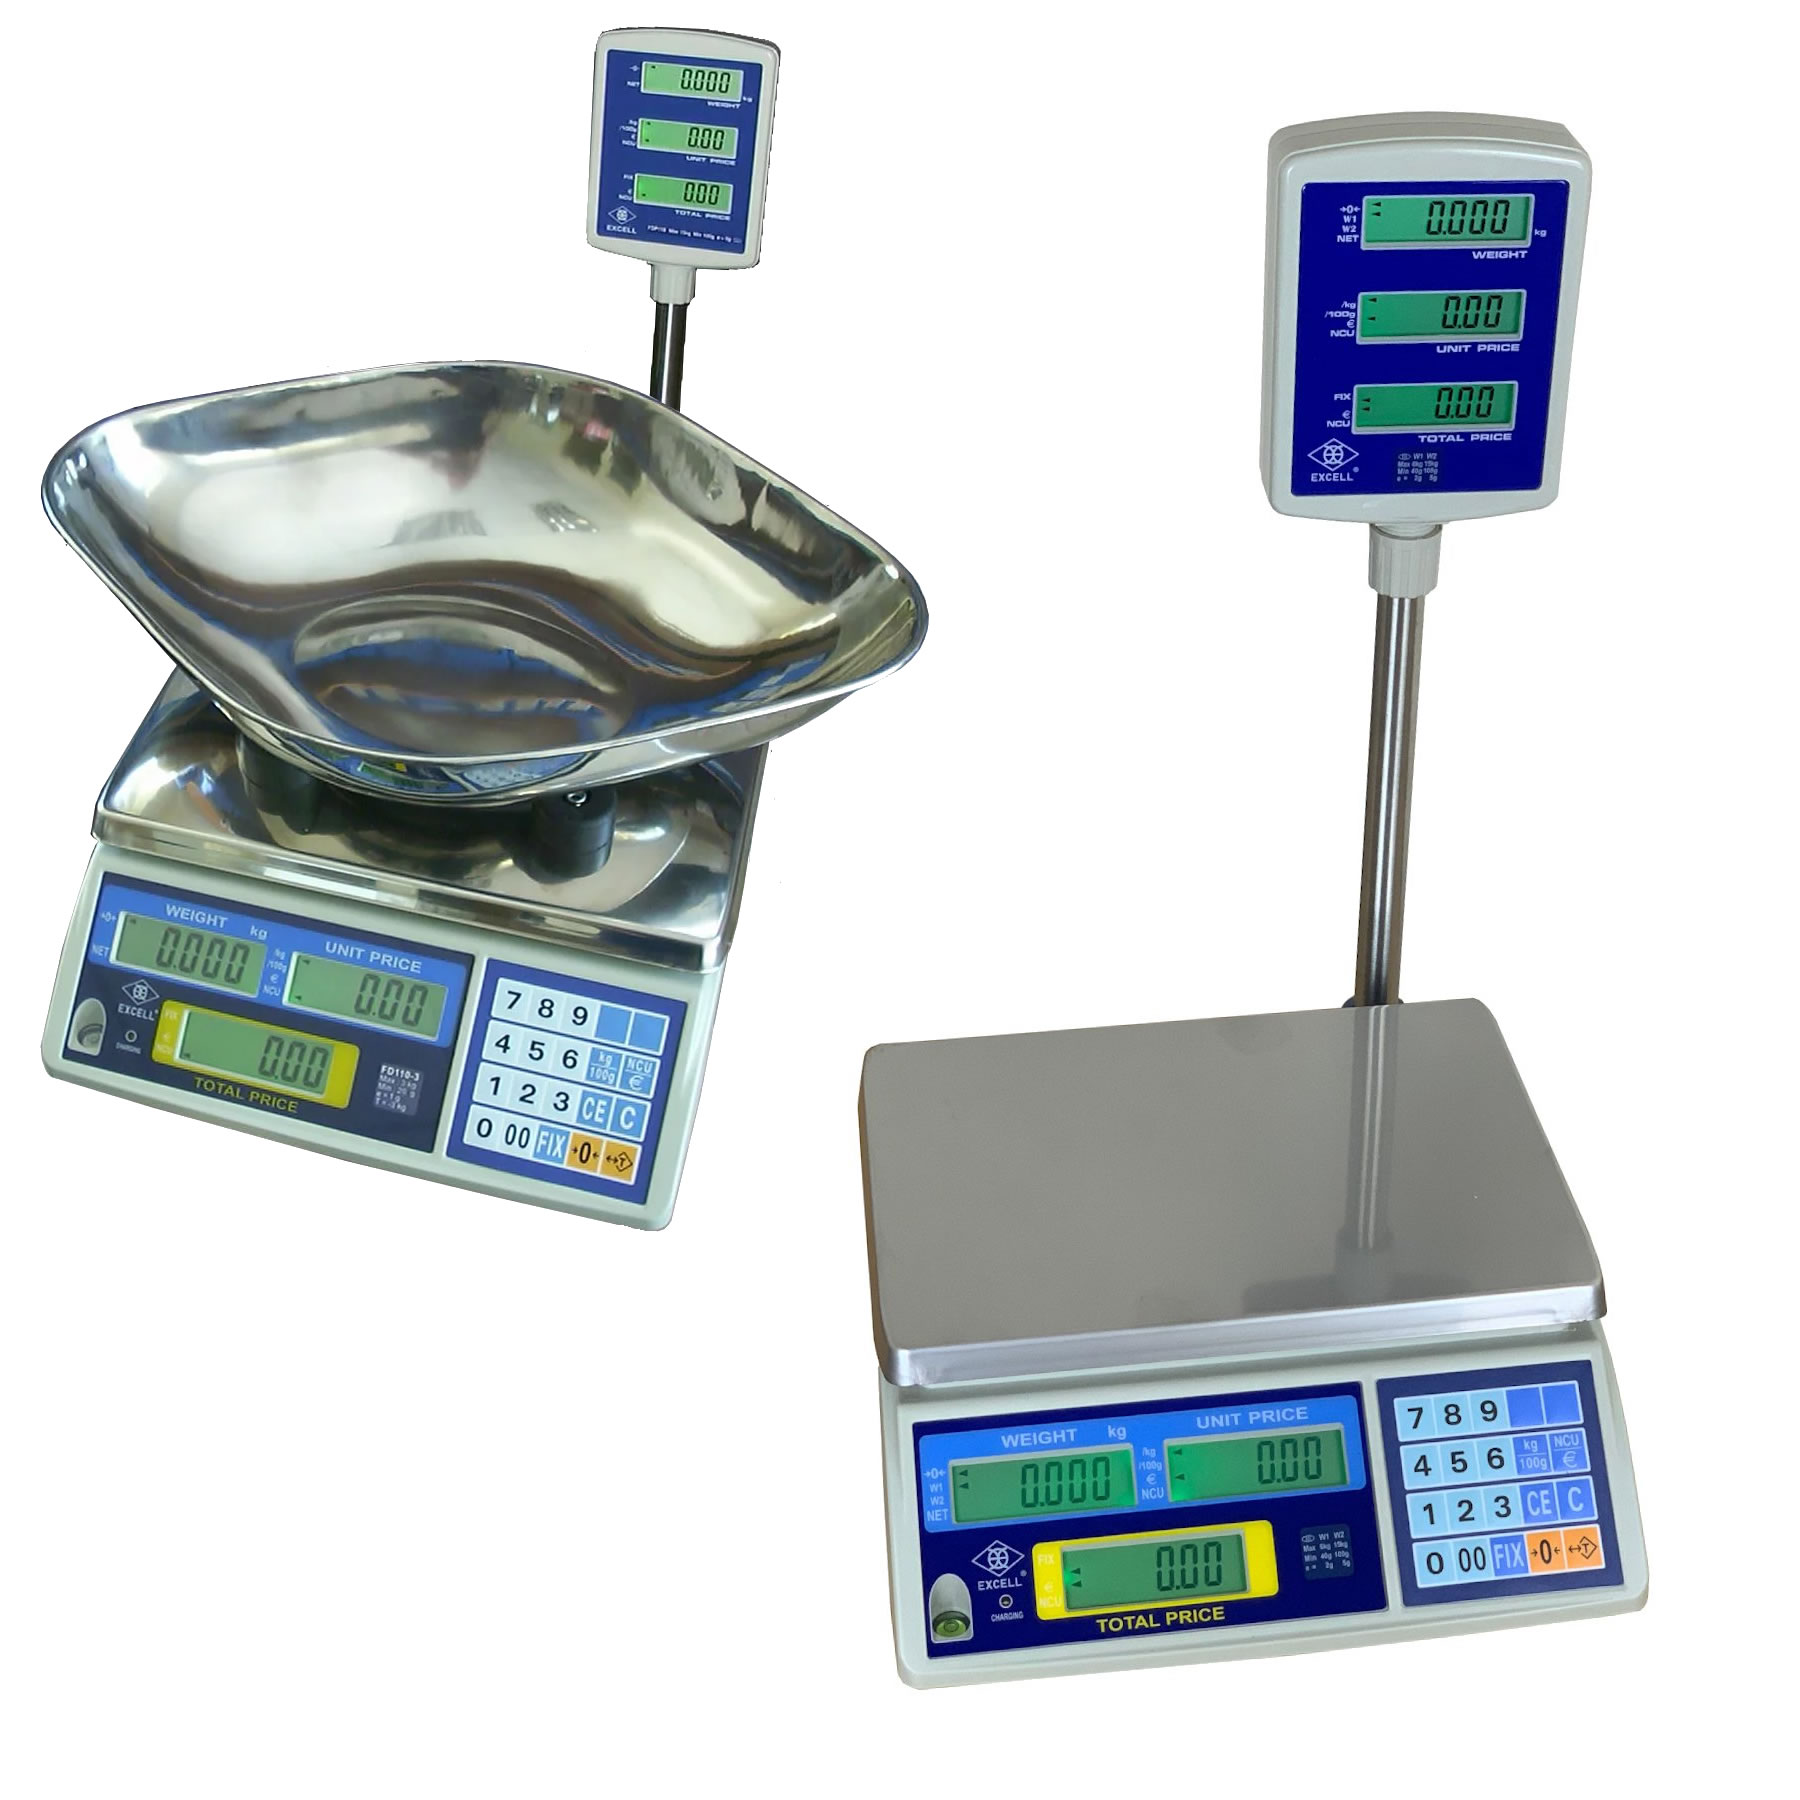 FD3 Retail Scale with Pole Display